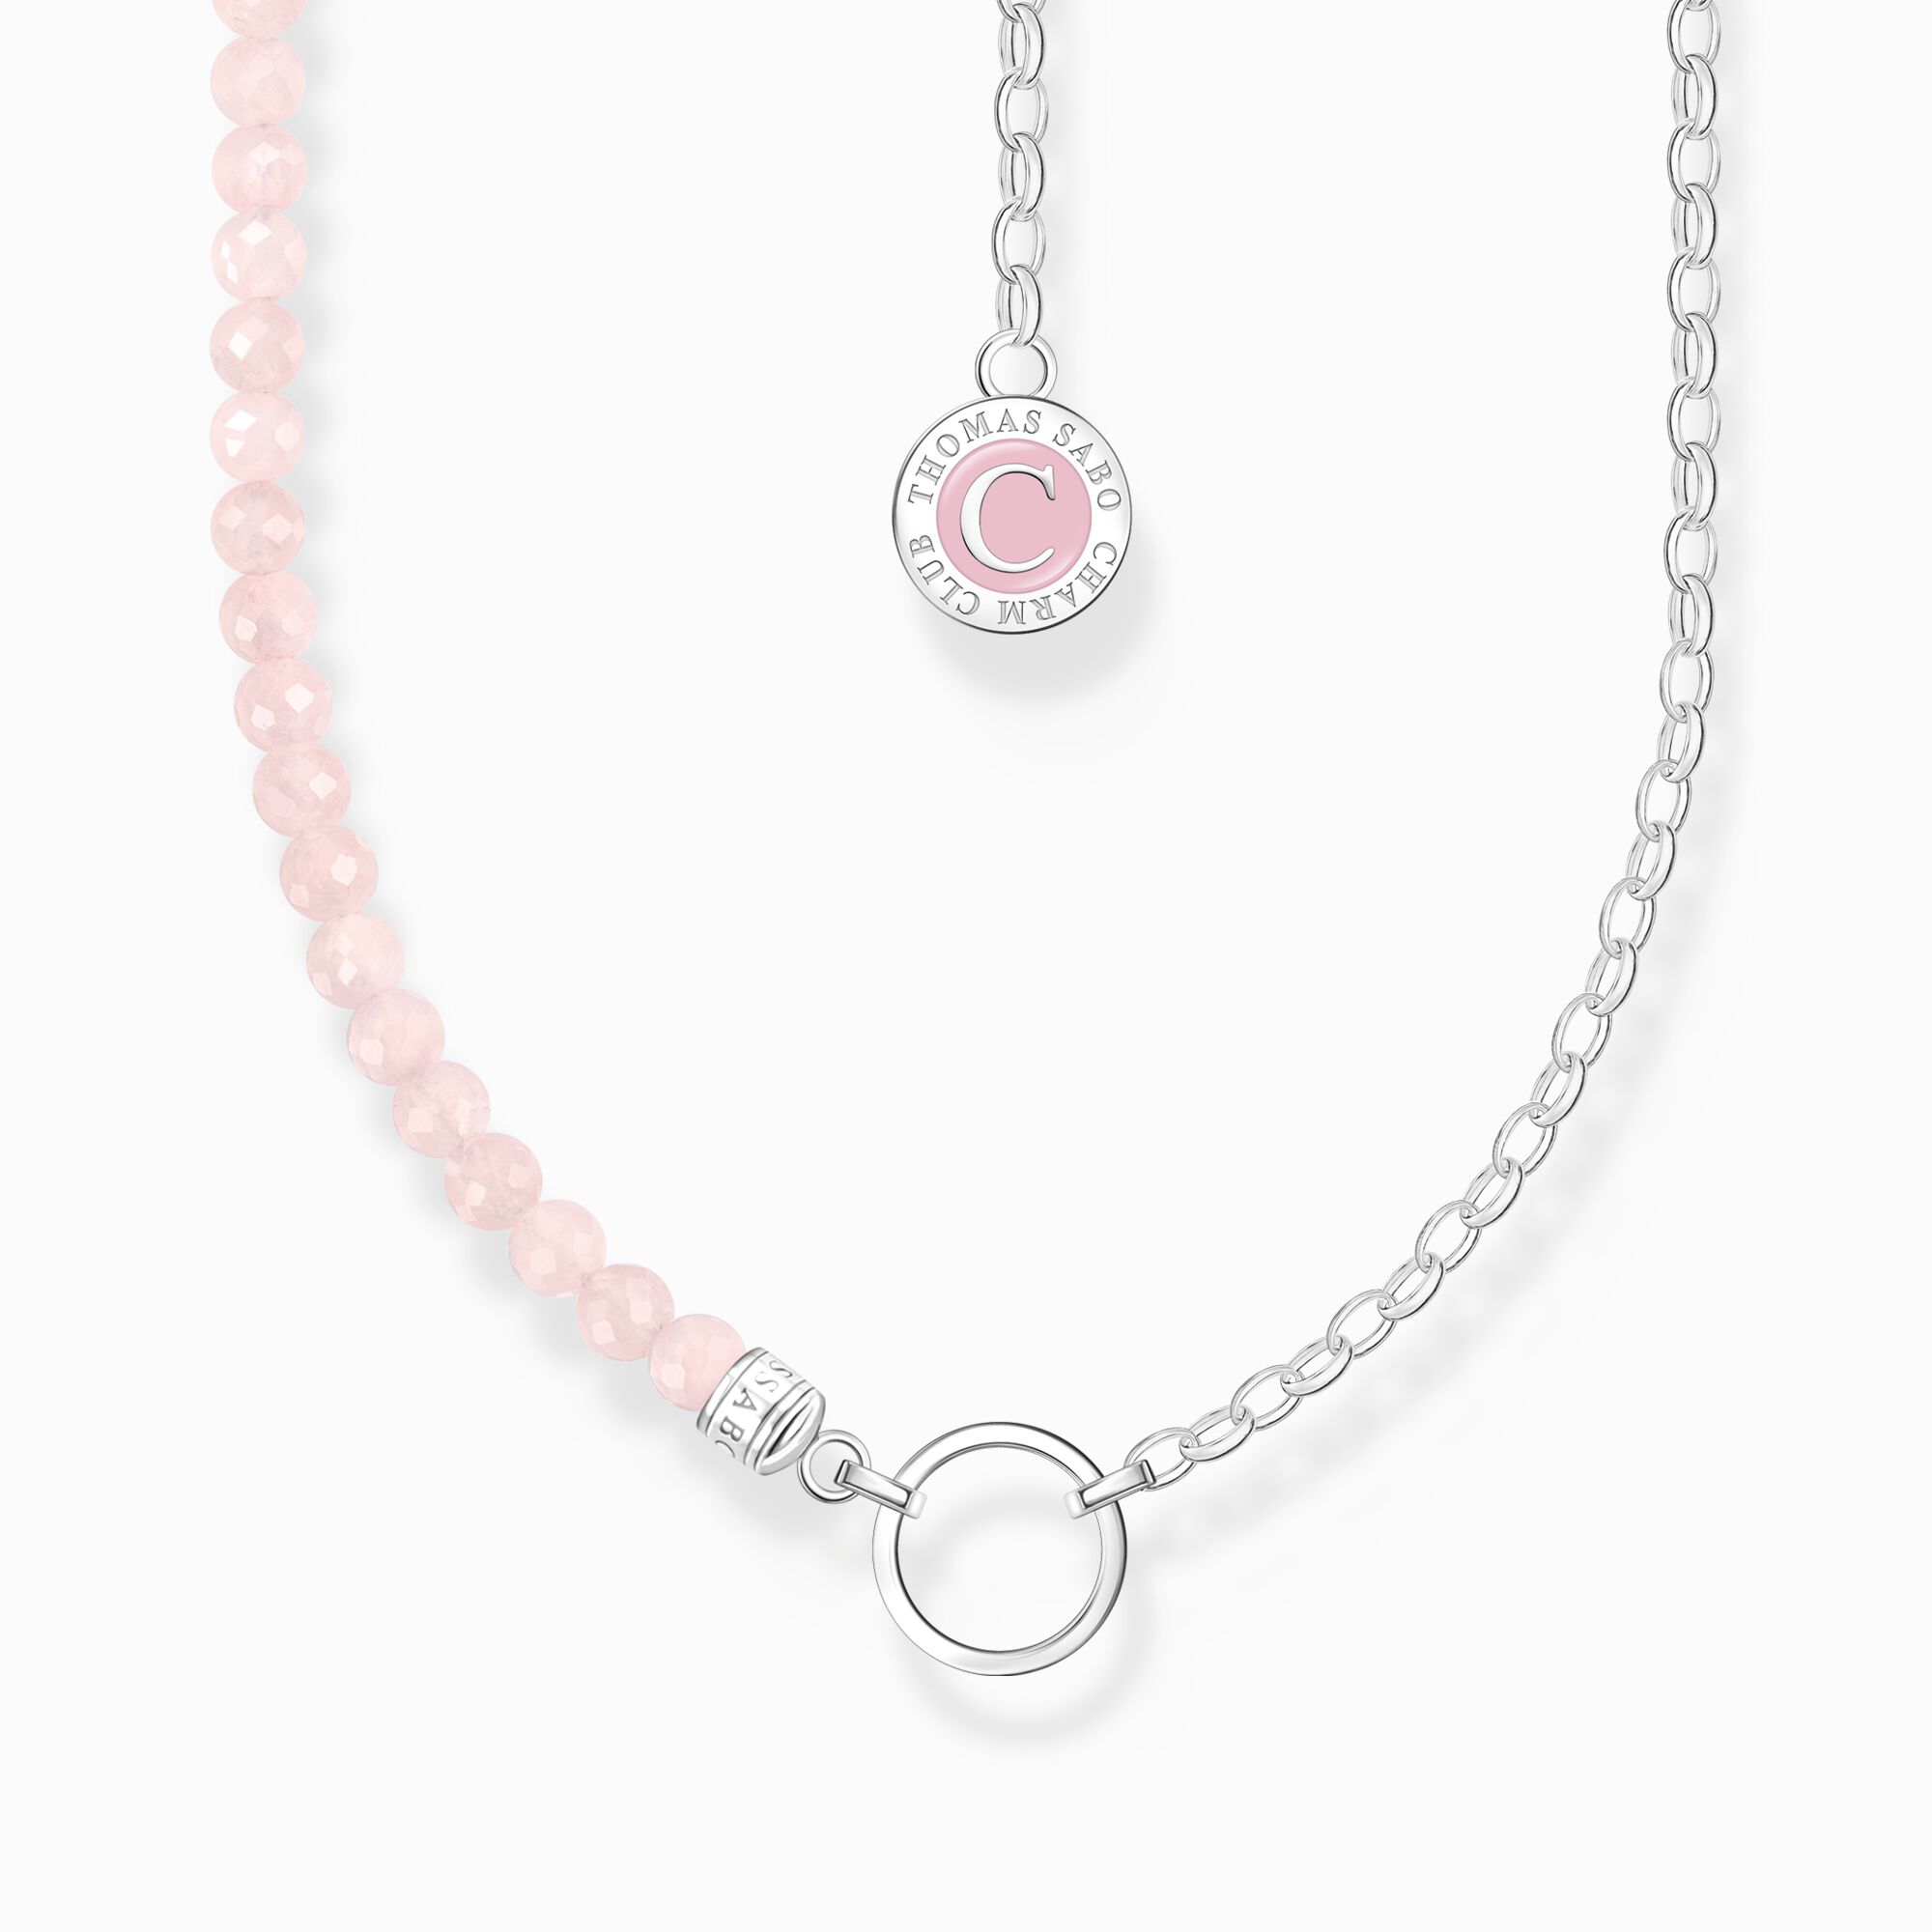 Member Charm necklace with beads of rose quartz and Charmista Coin silver from the Charm Club collection in the THOMAS SABO online store